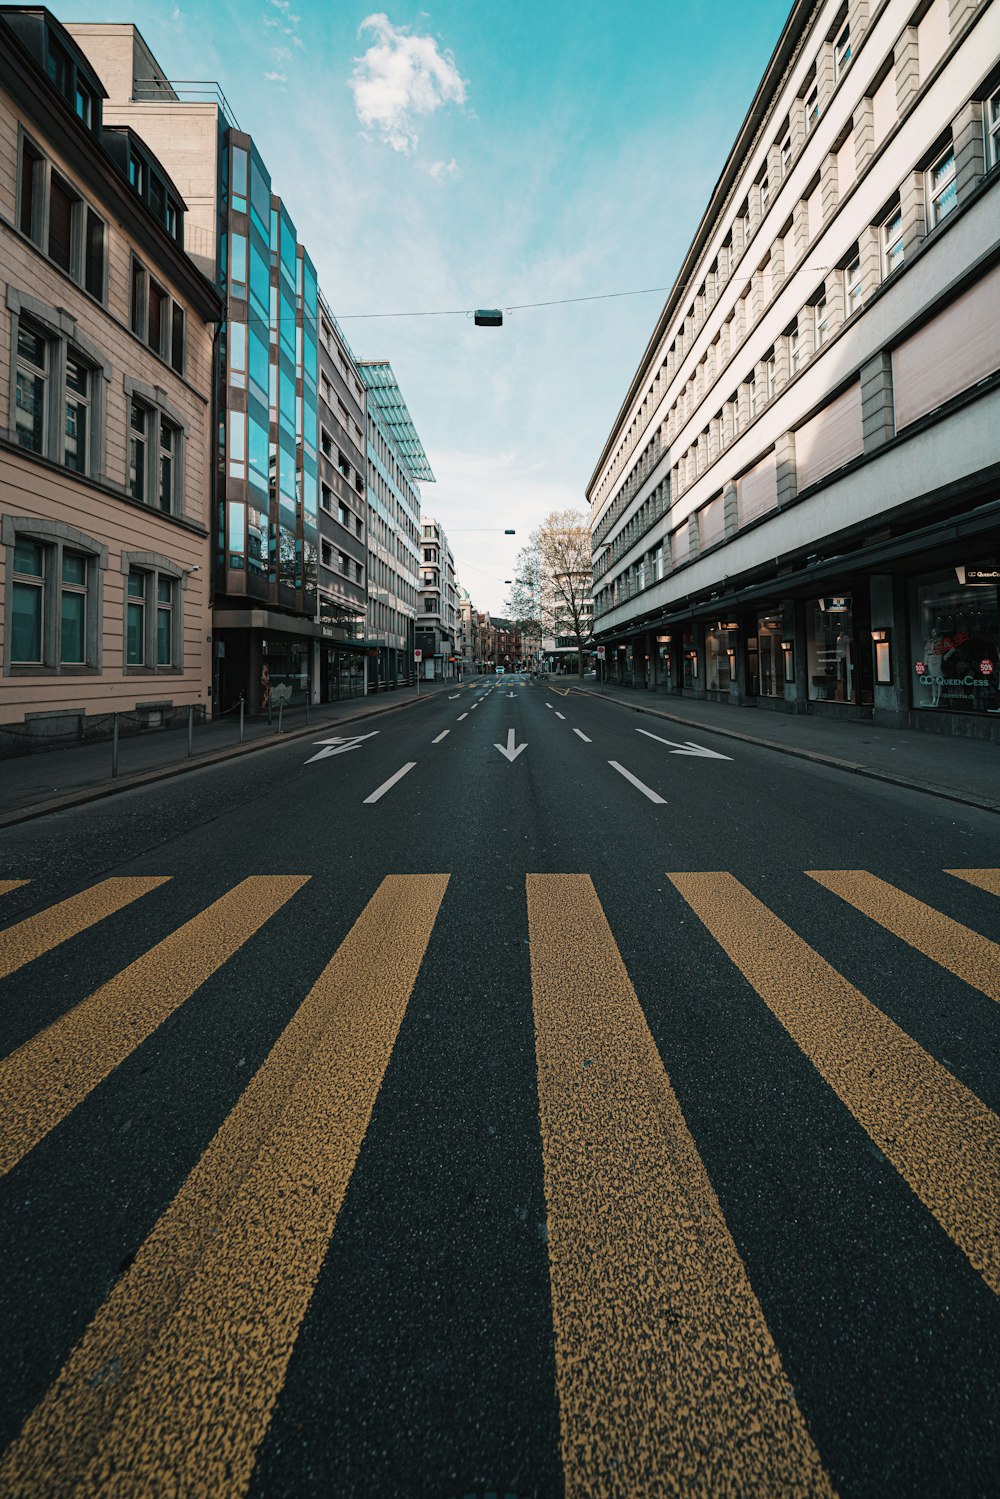 black and yellow pedestrian lane in between of brown and white concrete buildings during daytime